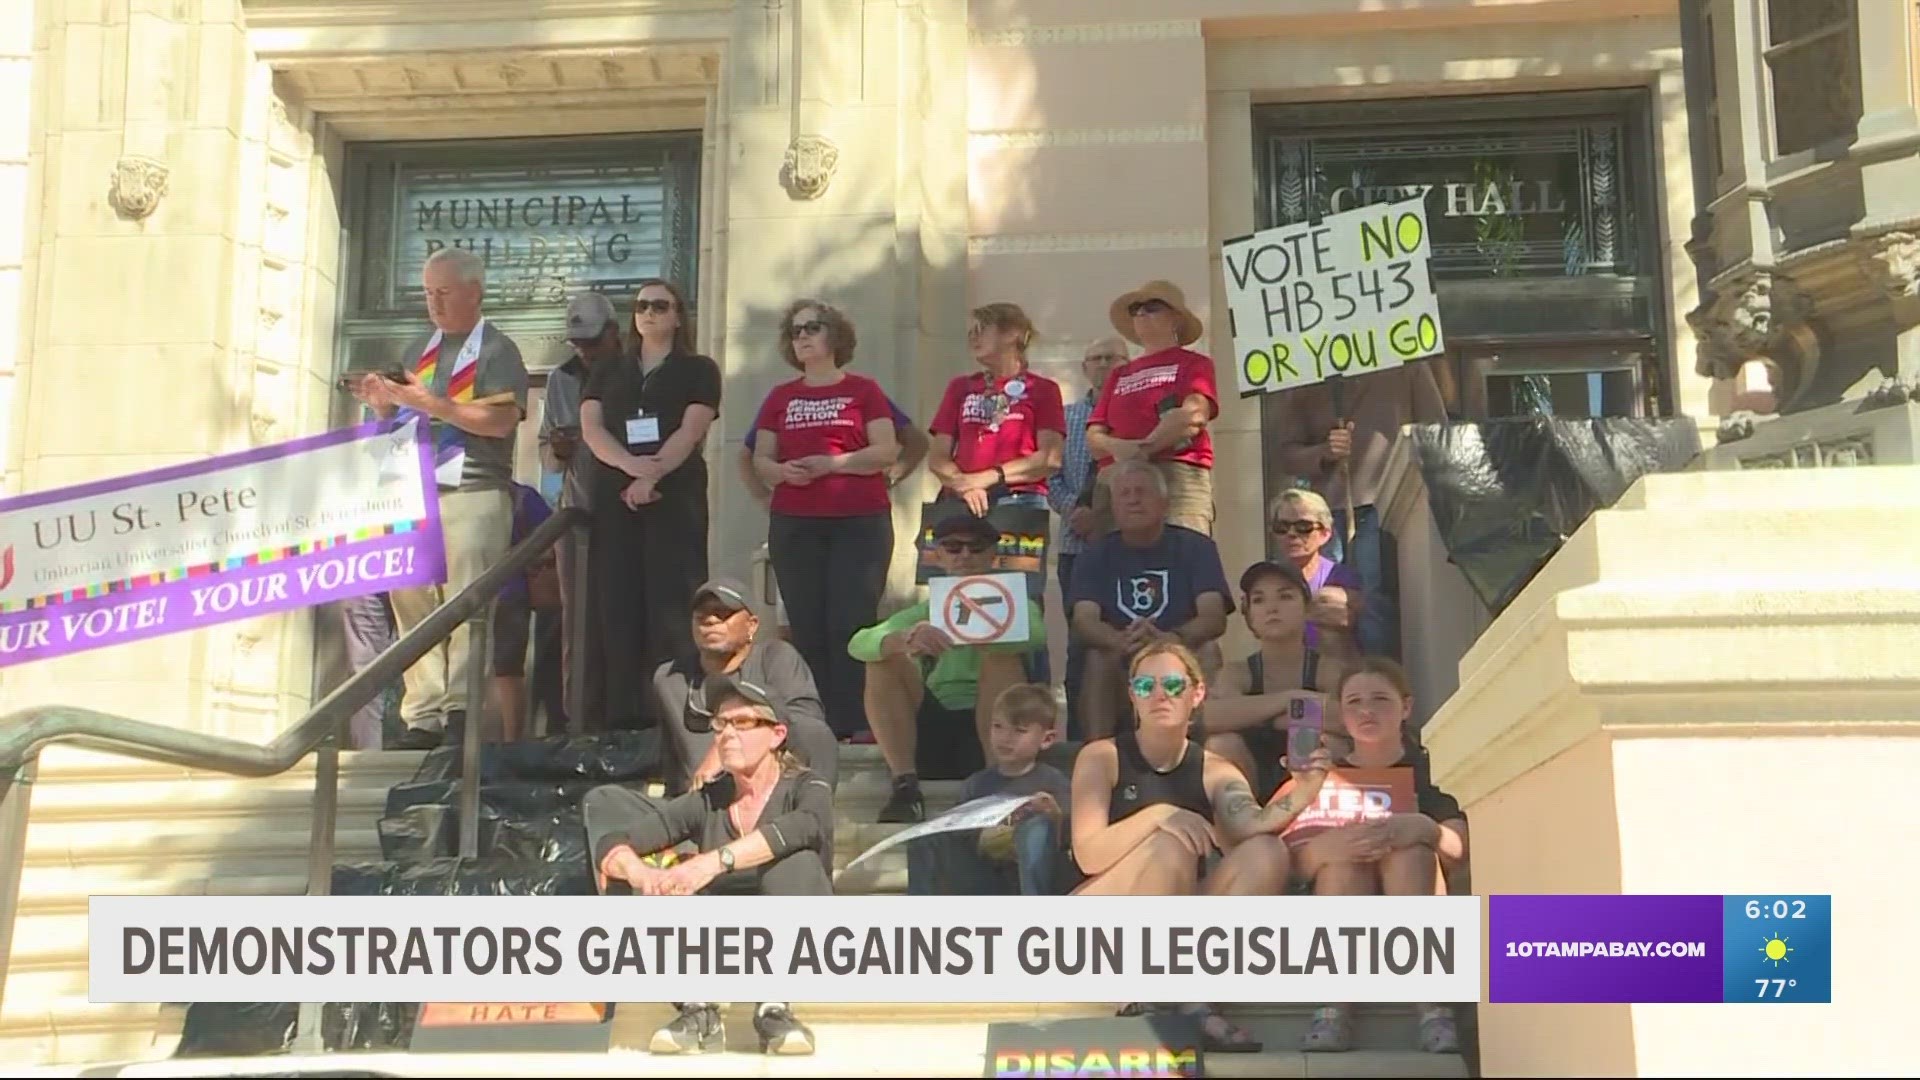 Families from school shootings spoke at the demonstration to push against lawmakers sponsoring the legislation.